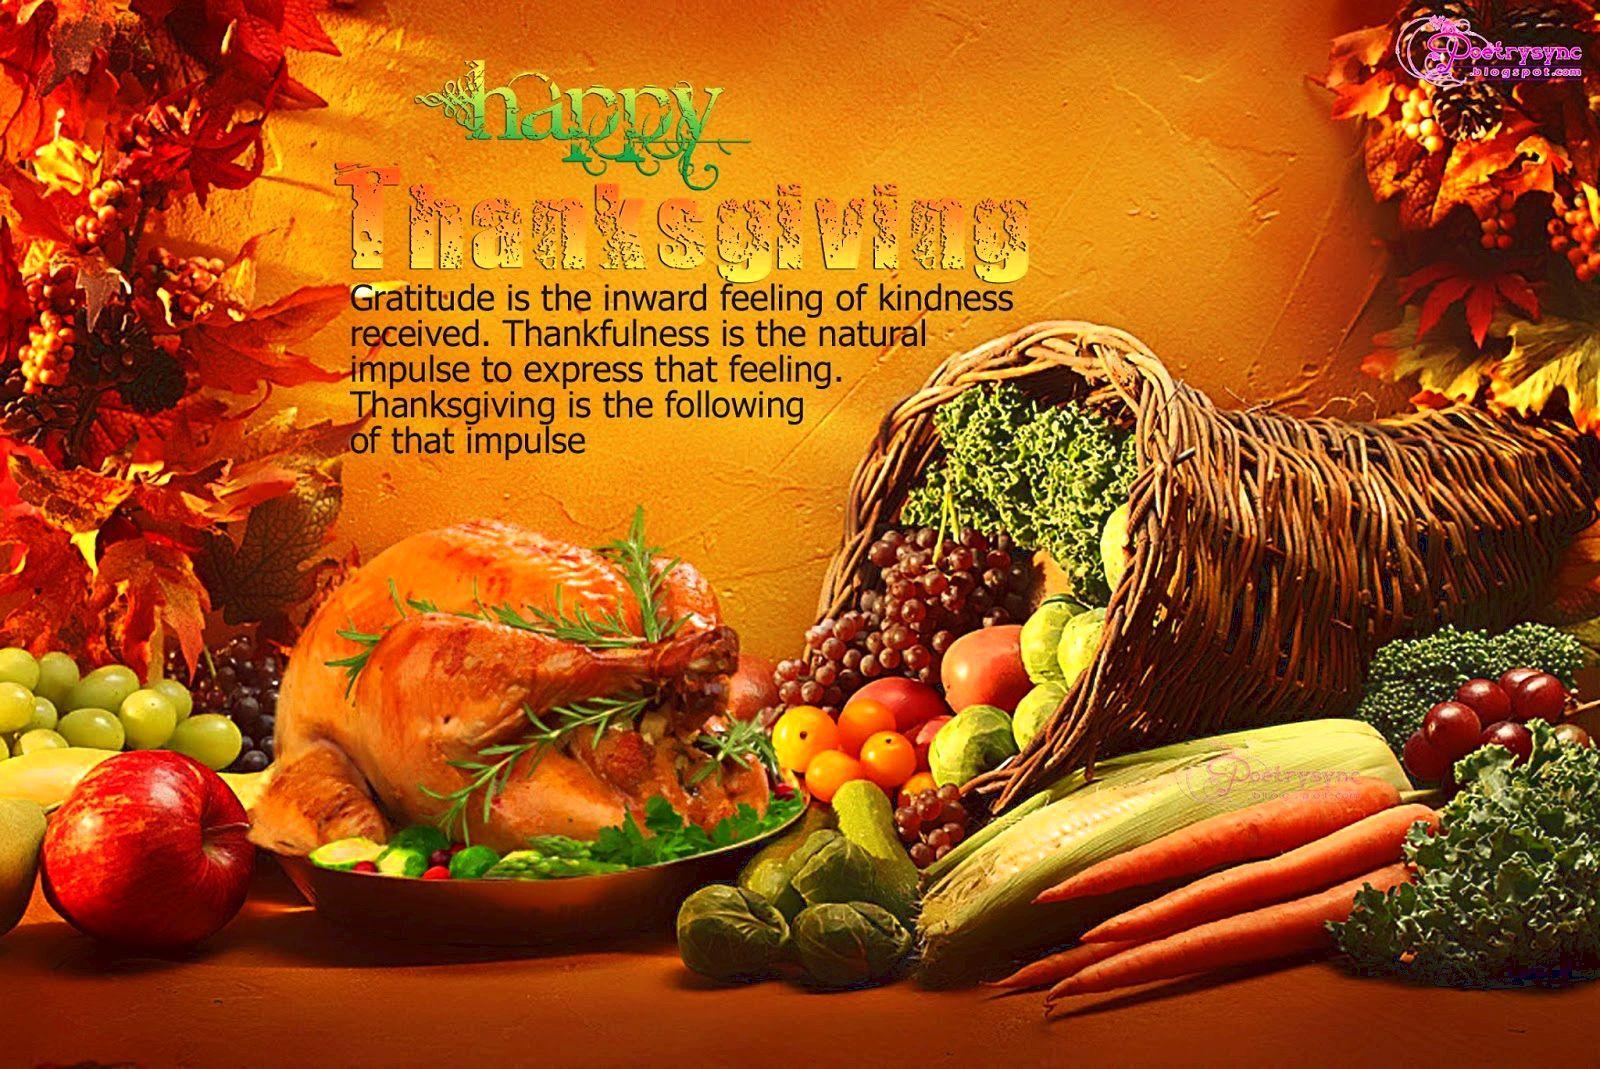 Happy thanksgiving day 2016 clip arts download free image